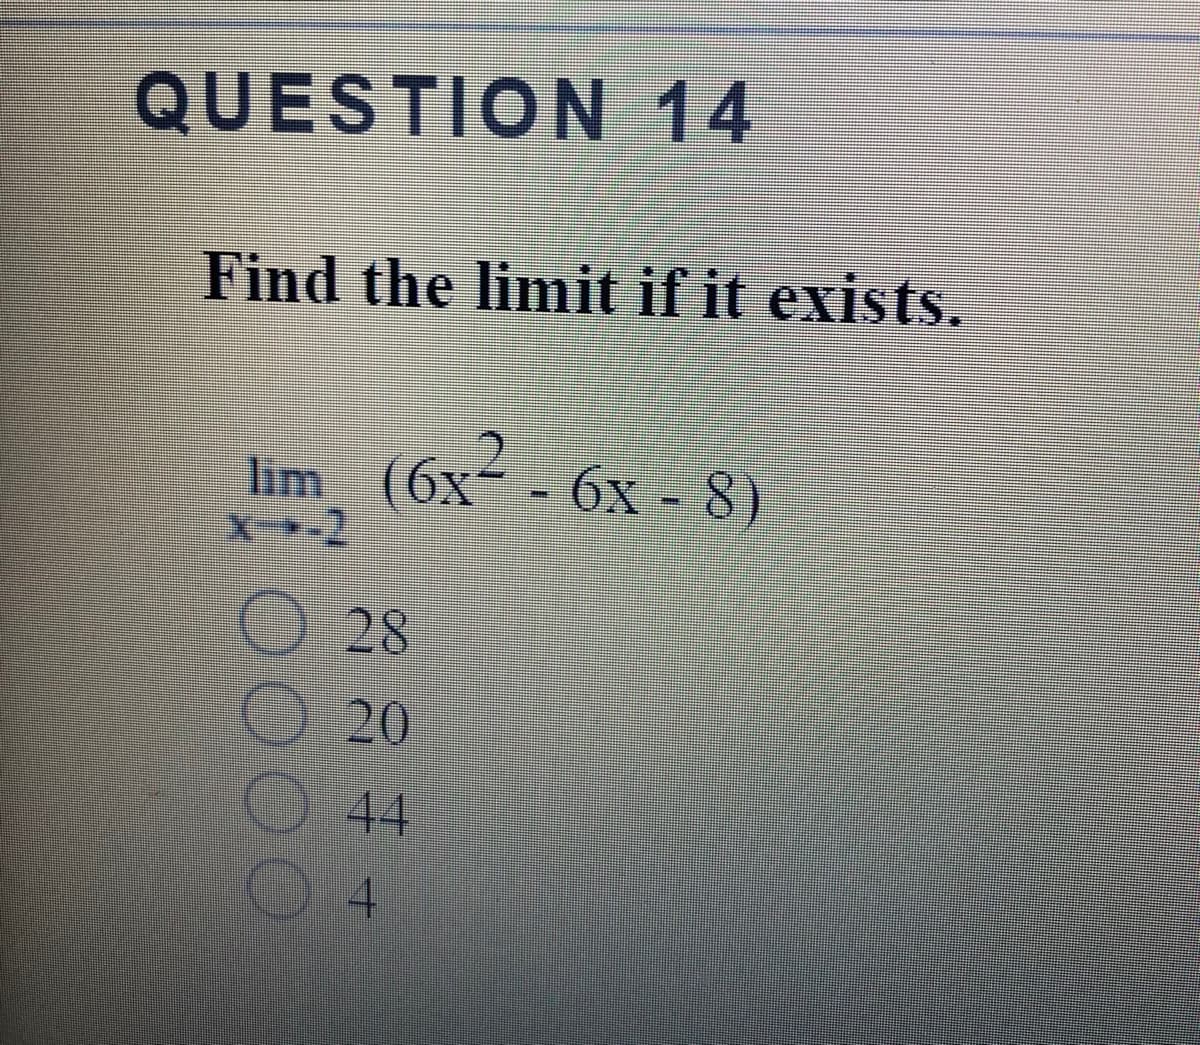 QUESTION 14
Find the limit if it exists.
Im (6x- 6x -8)
28
20
44
4.
o000
